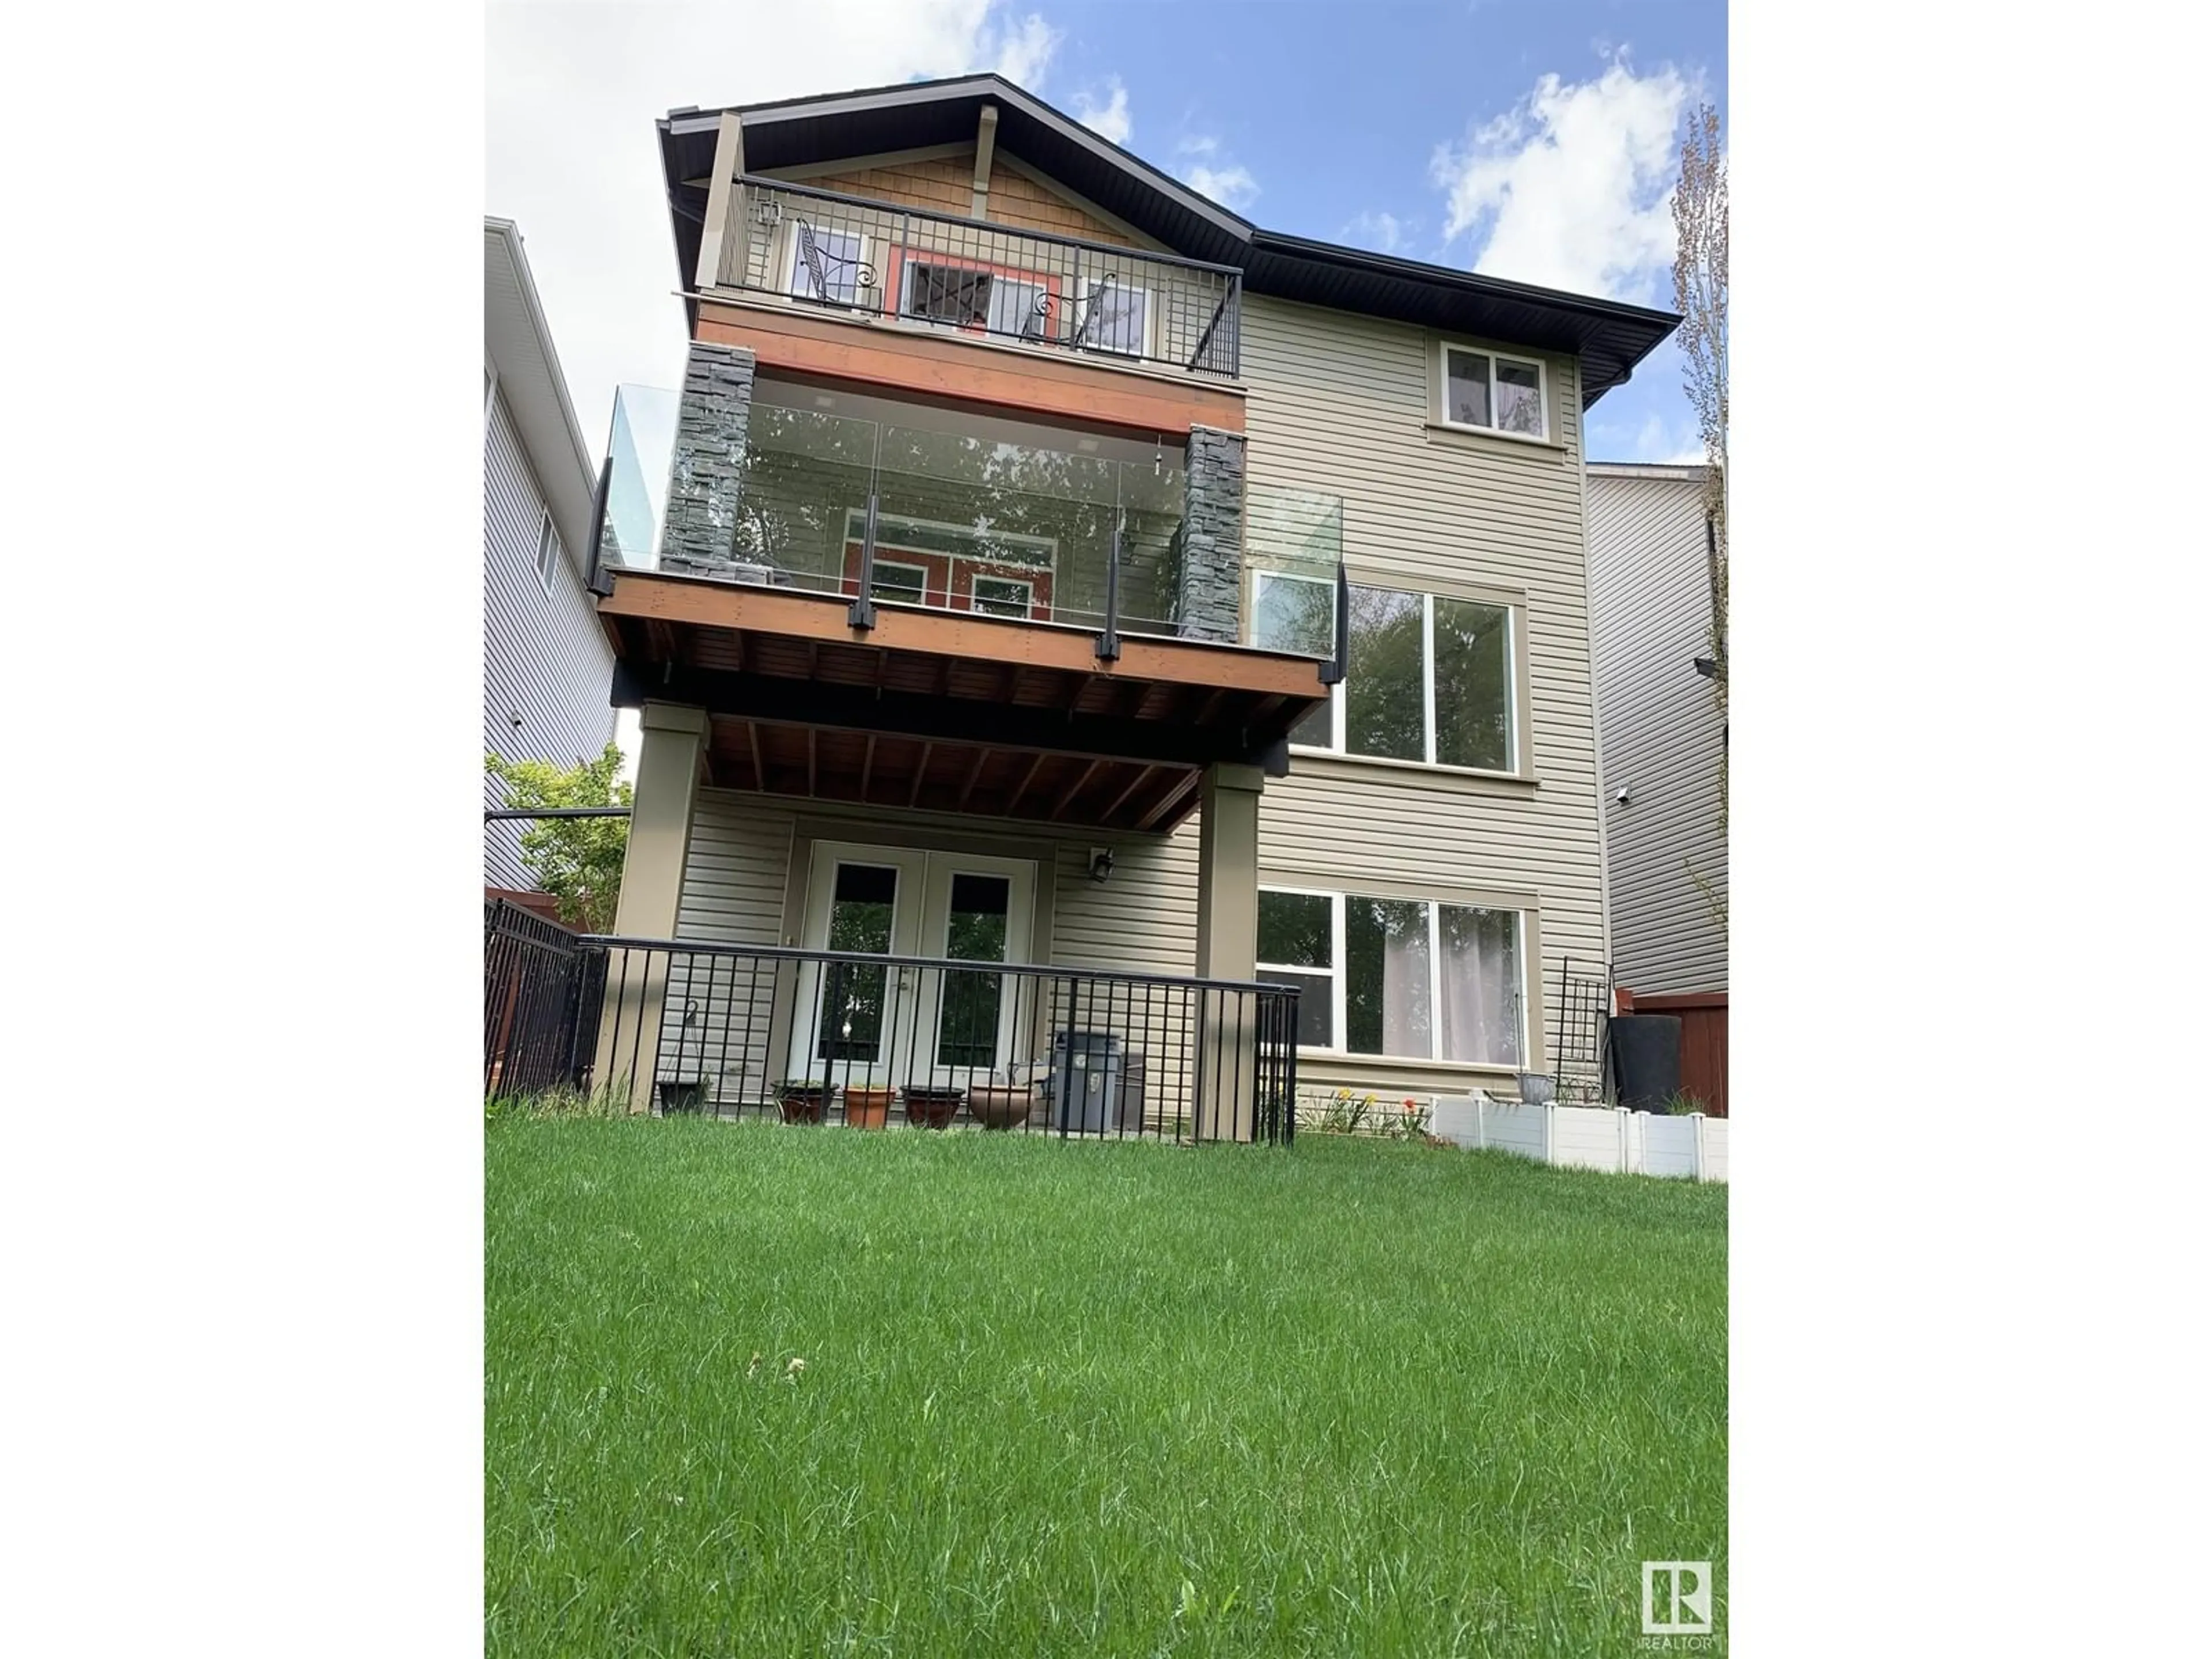 Frontside or backside of a home for 21857 95A AV NW, Edmonton Alberta T5T3Y6